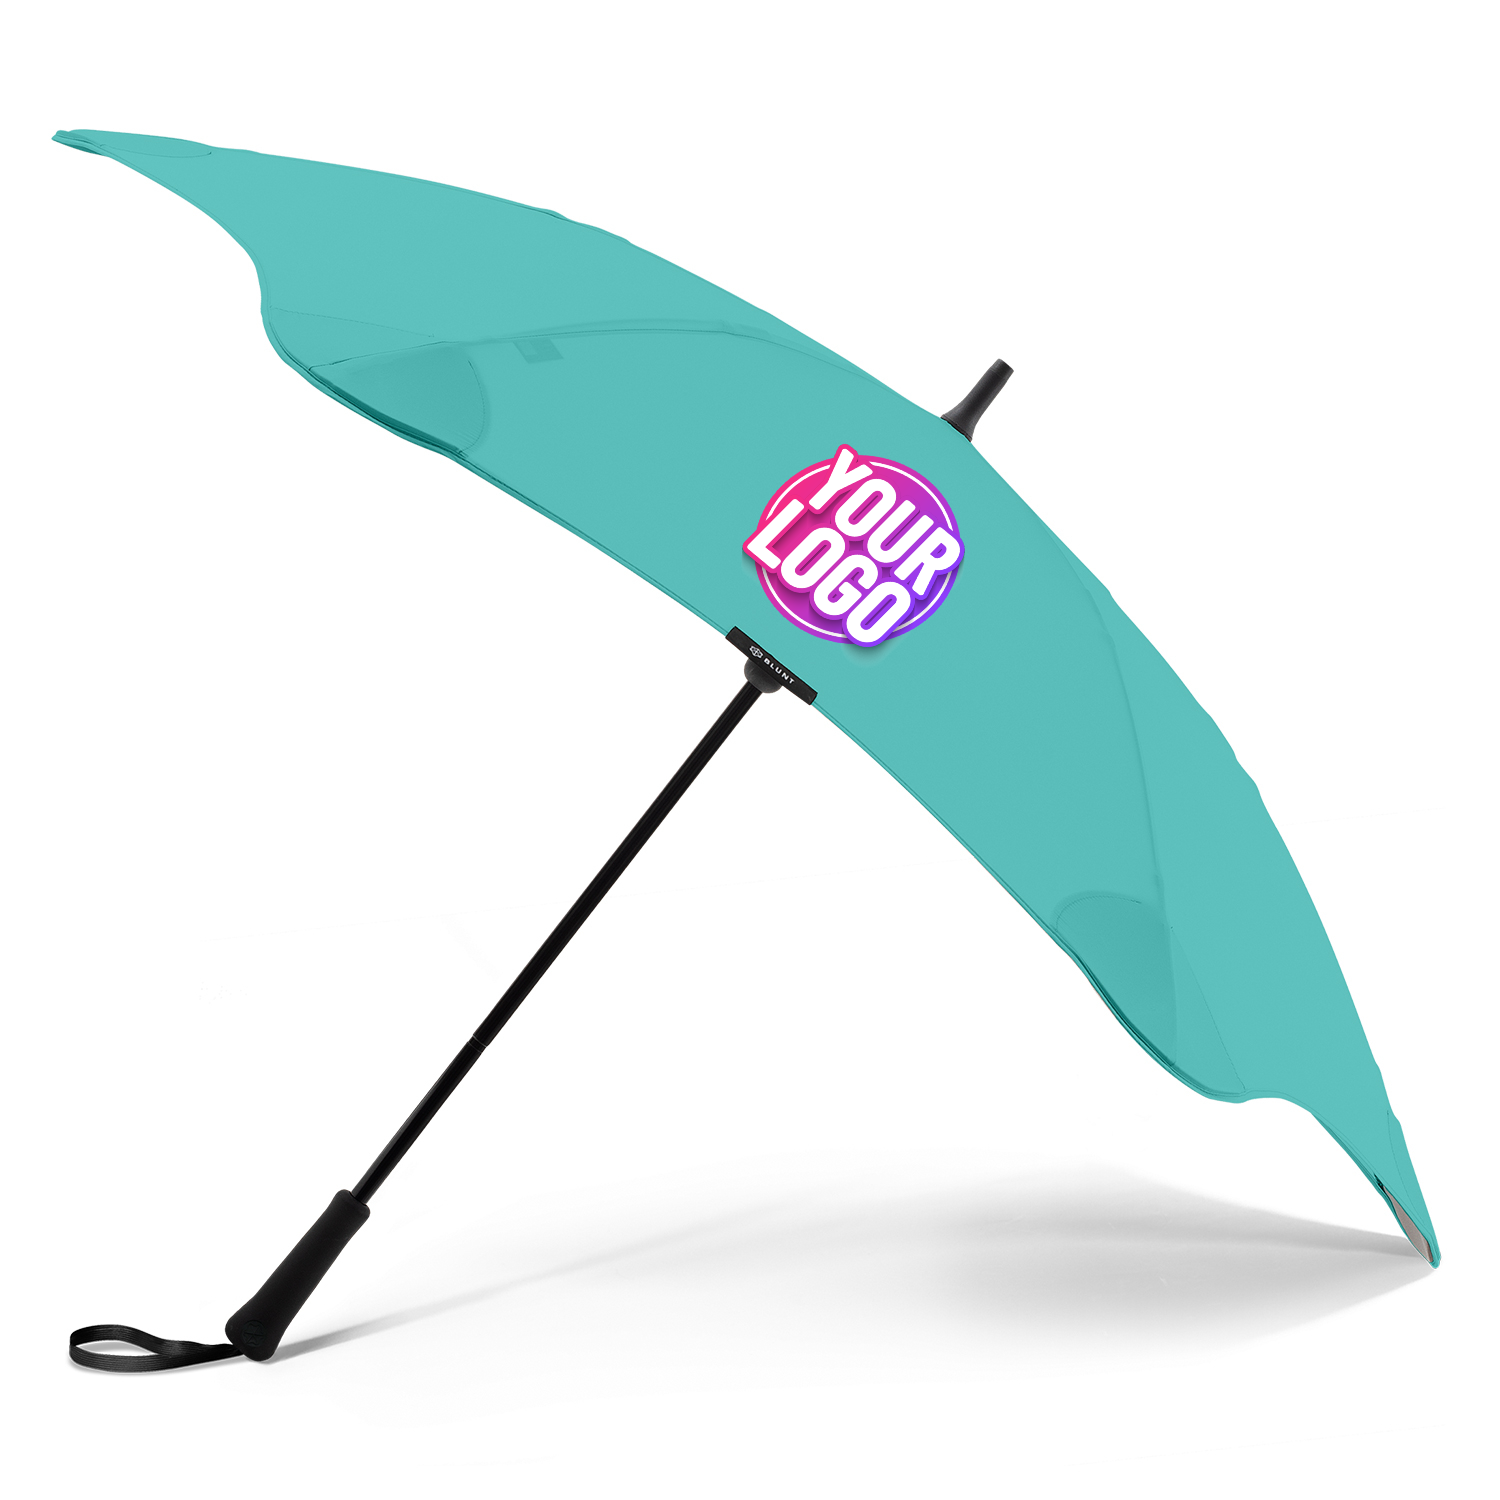 CUSTOM BRANDED - BLUNT®️ Classic Umbrella - The traditional umbrella re-imagined - With Wind Proof Frame